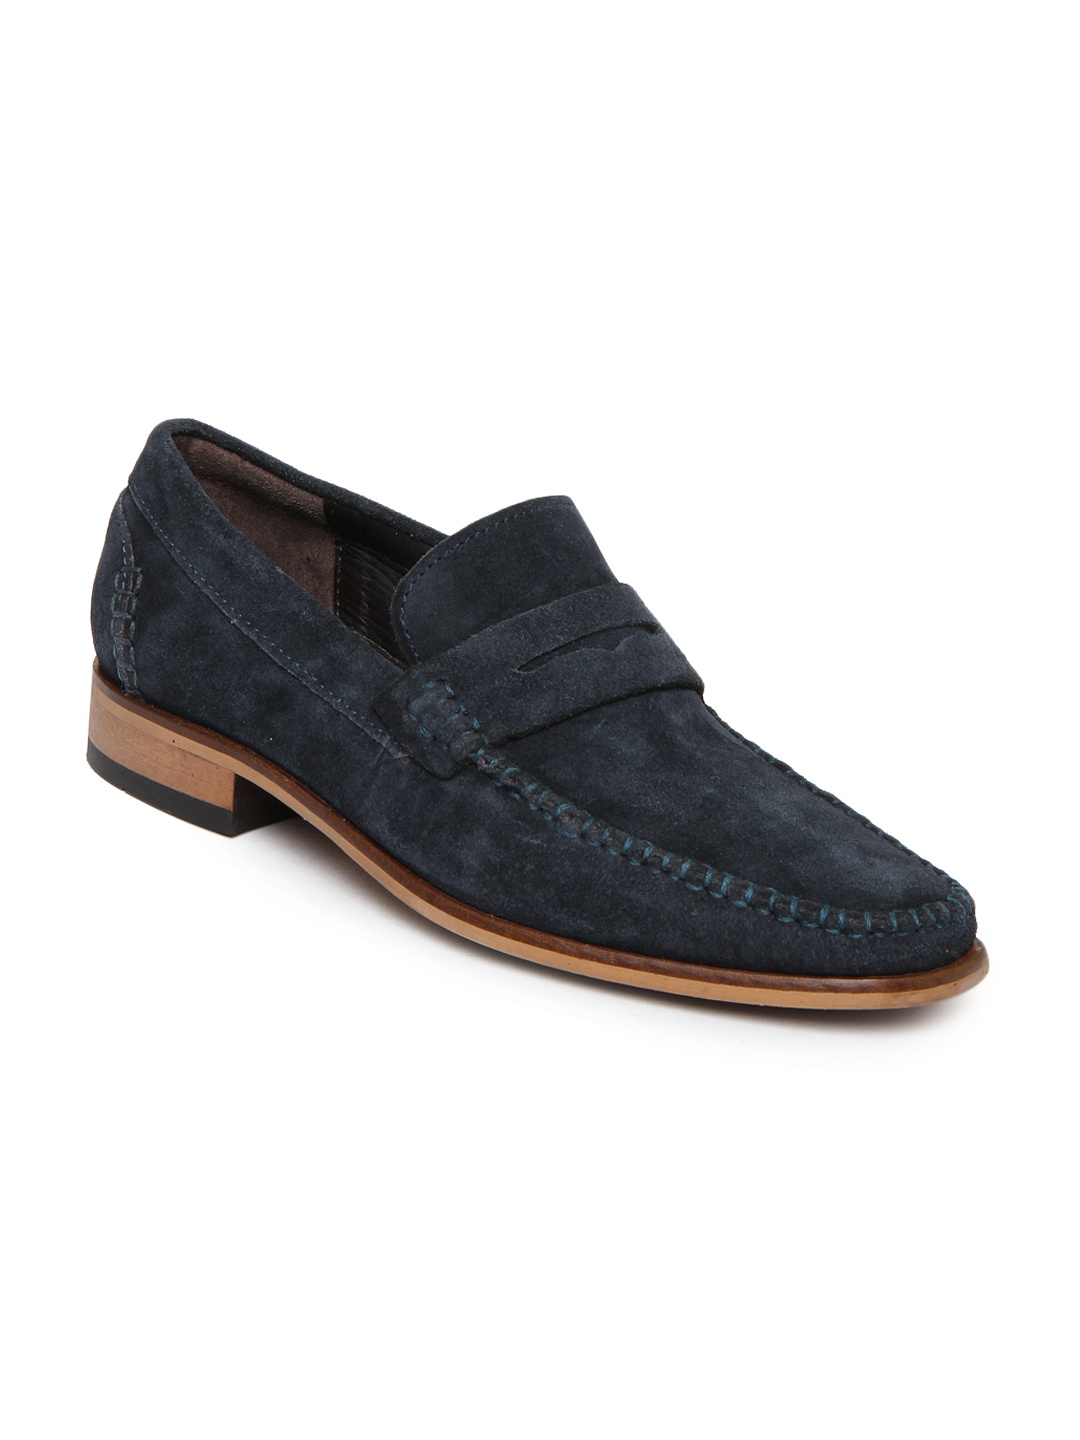 Myntra Ruosh Occasion Men Blue Leather Semi-Formal Shoes 365034 | Buy ...